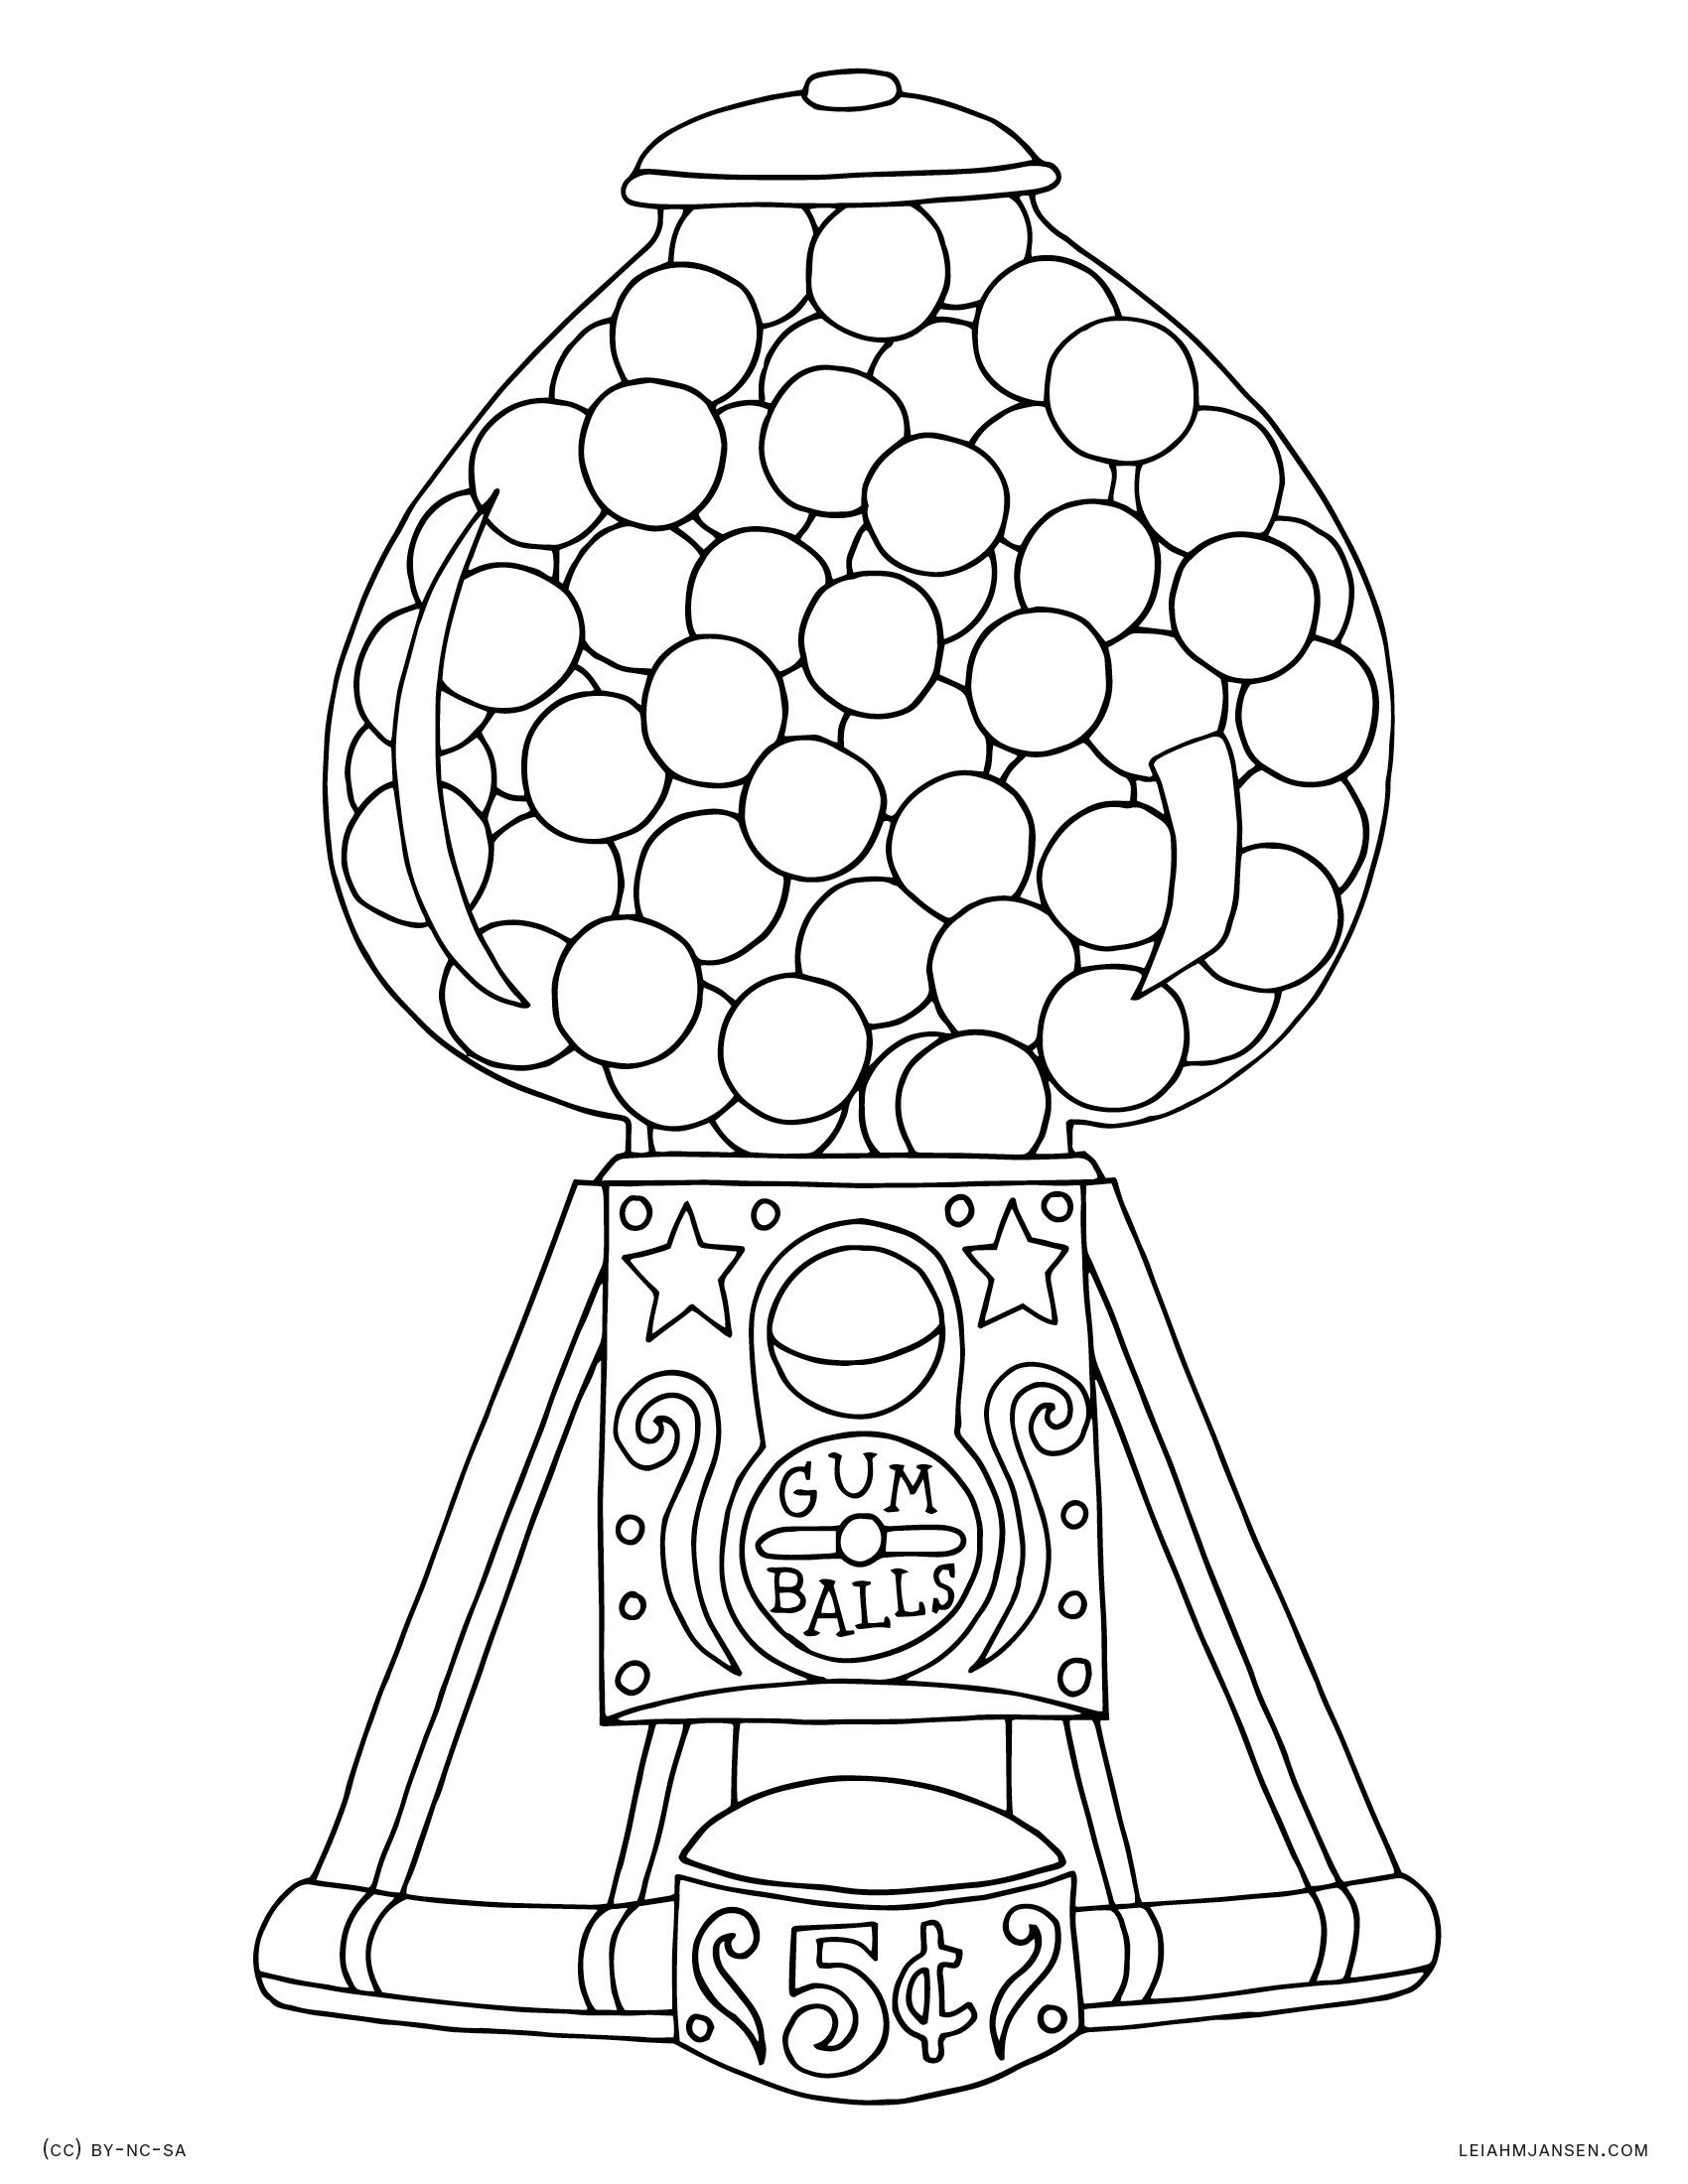 Gumball Machine Coloring Pages (Page 1) - Line.17QQ.com